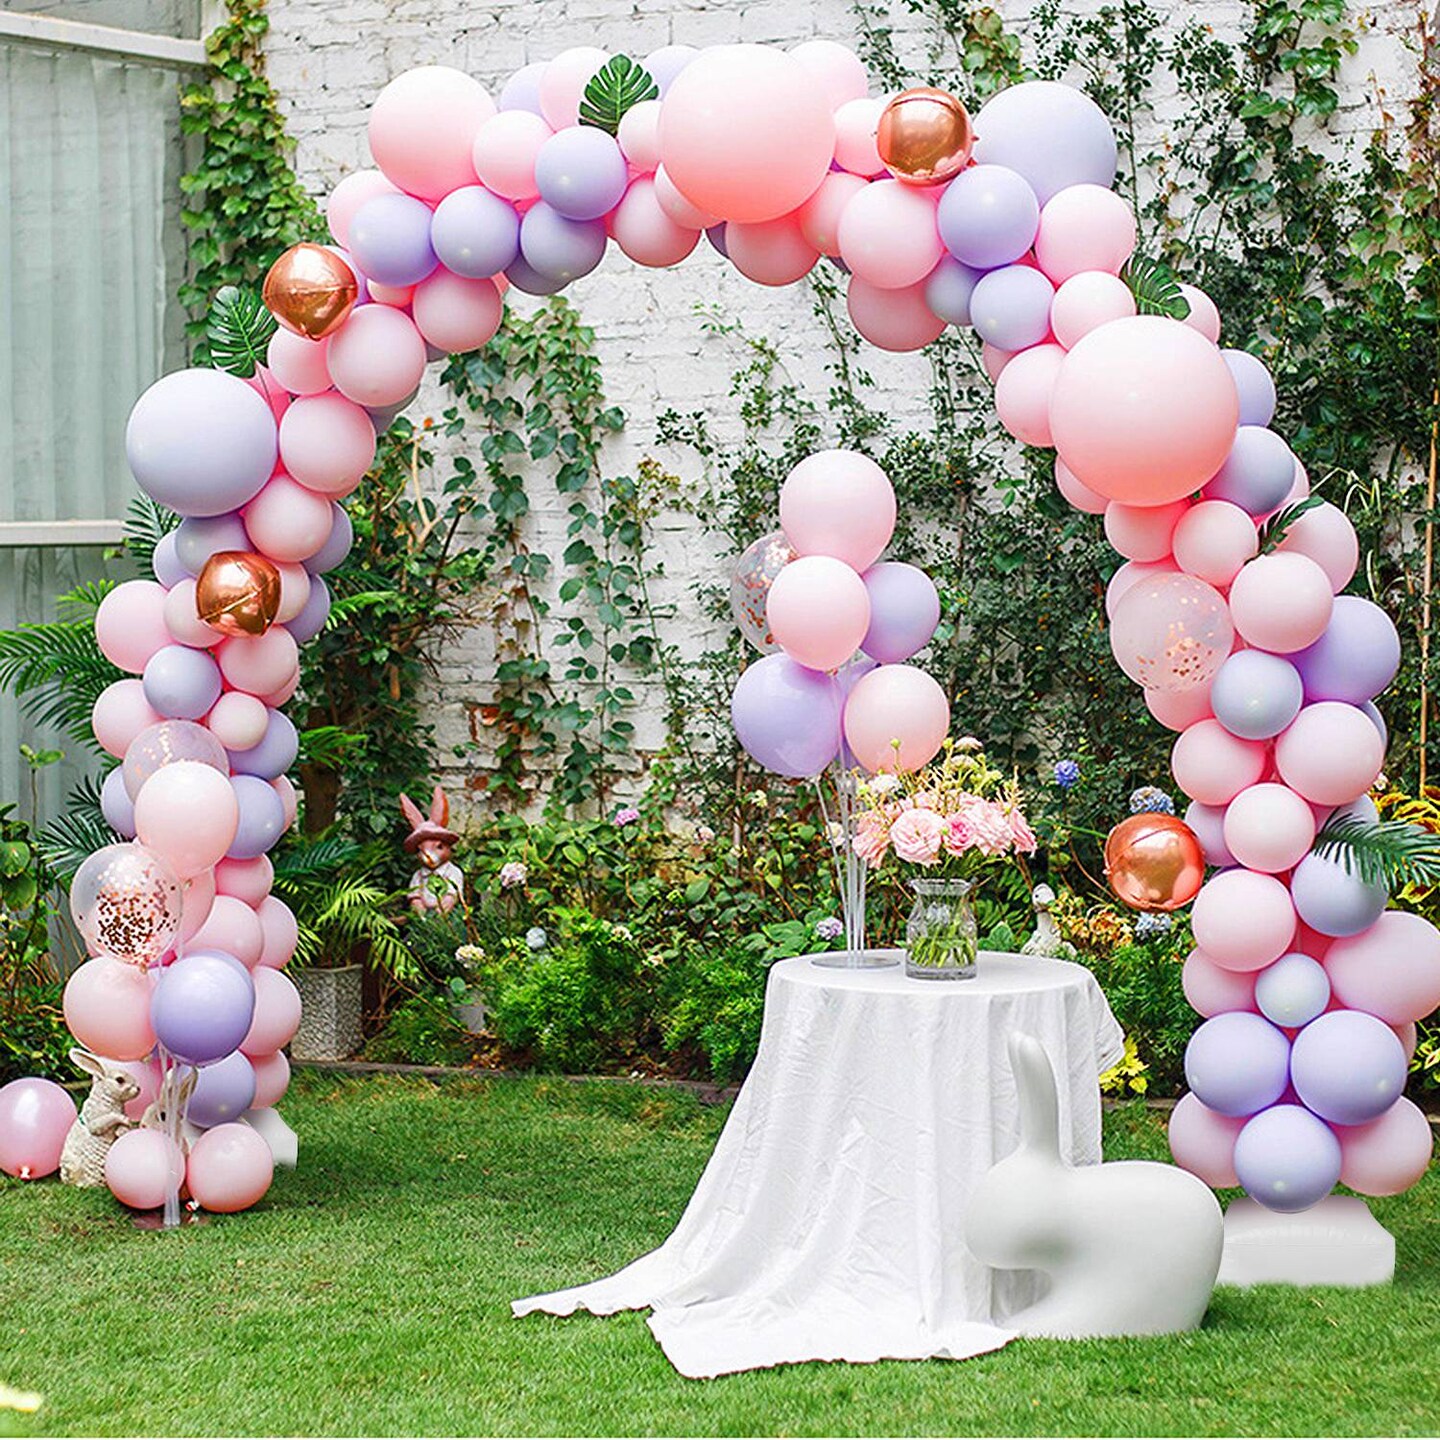 Eggracks By Global Phoenix Balloon Arch Stand Kit Adjustable Background Balloon Frame Stand Set